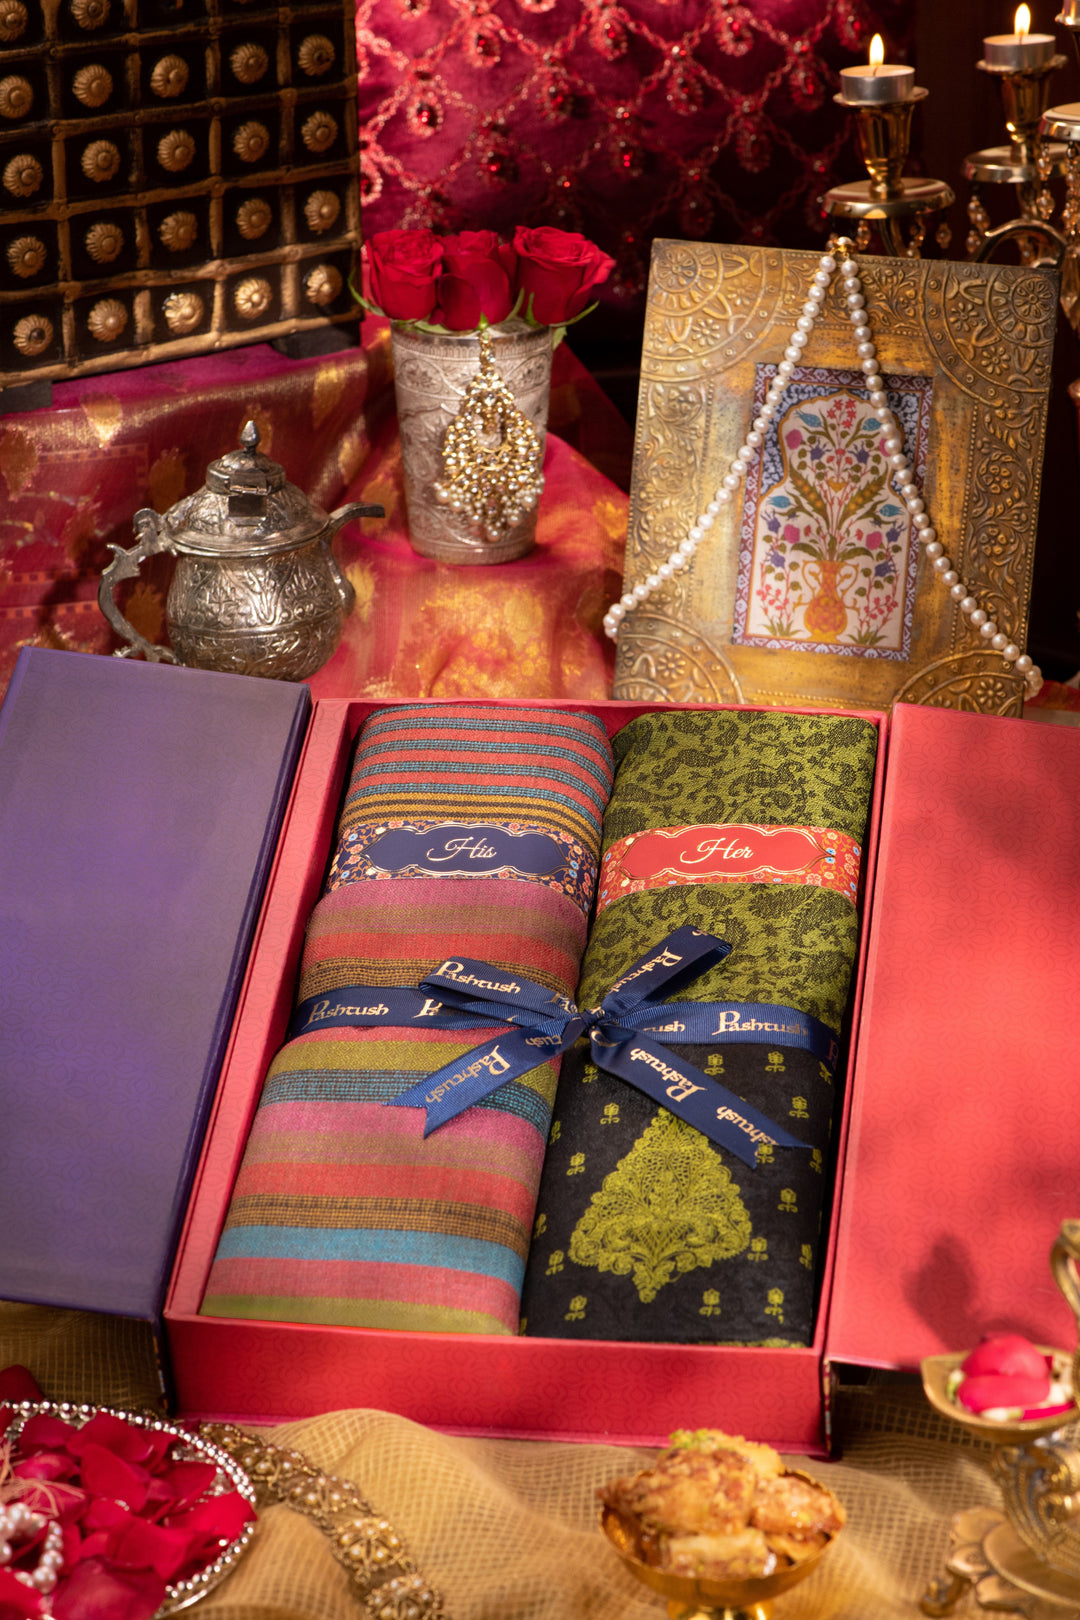 Pashtush India Gift Pack Pashtush His And Her Gift Set Of Fine Wool Stole and Embroidery Shawl With Premium Gift Box Packaging, Multicolour and Green